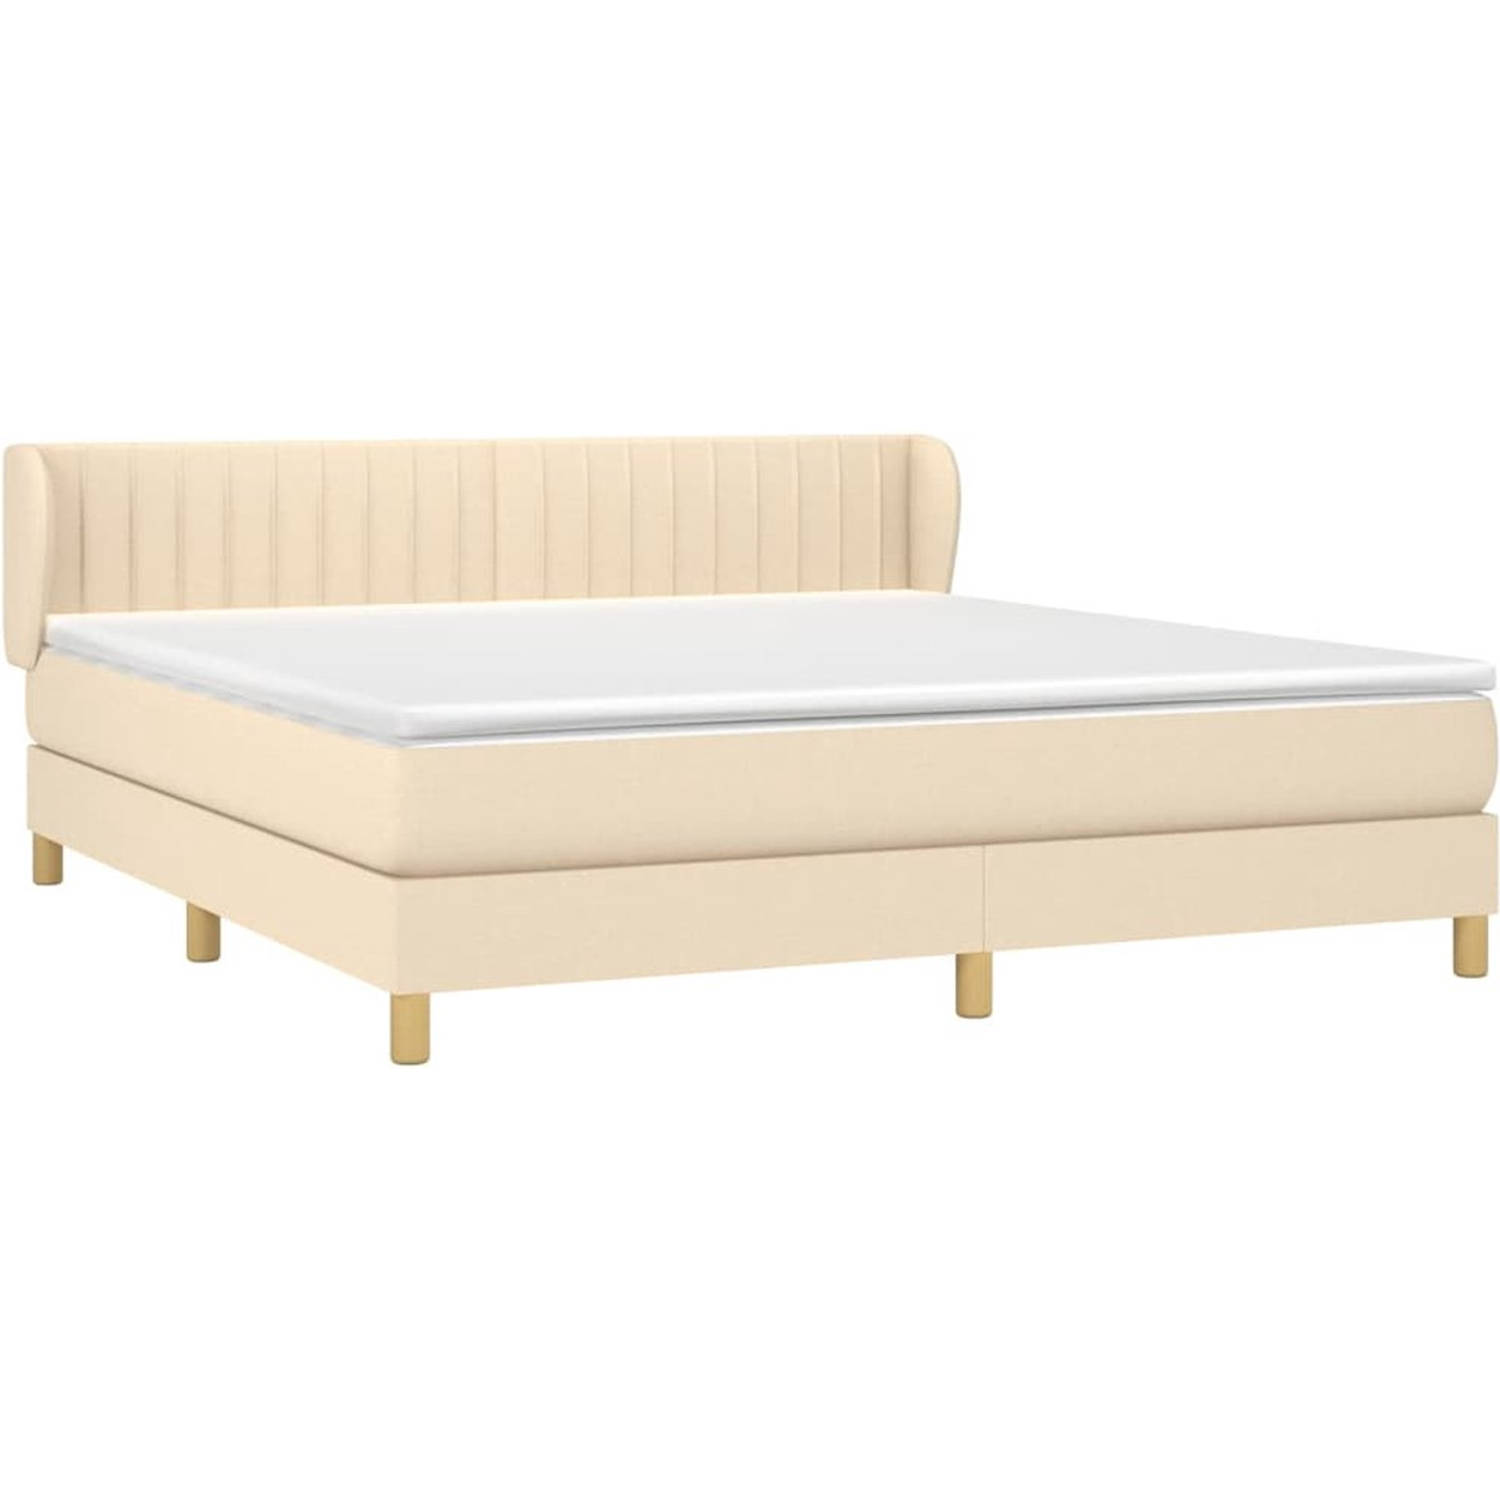 The Living Store Boxspringbed - Rustgevend - Bed - 180x200 - Crème